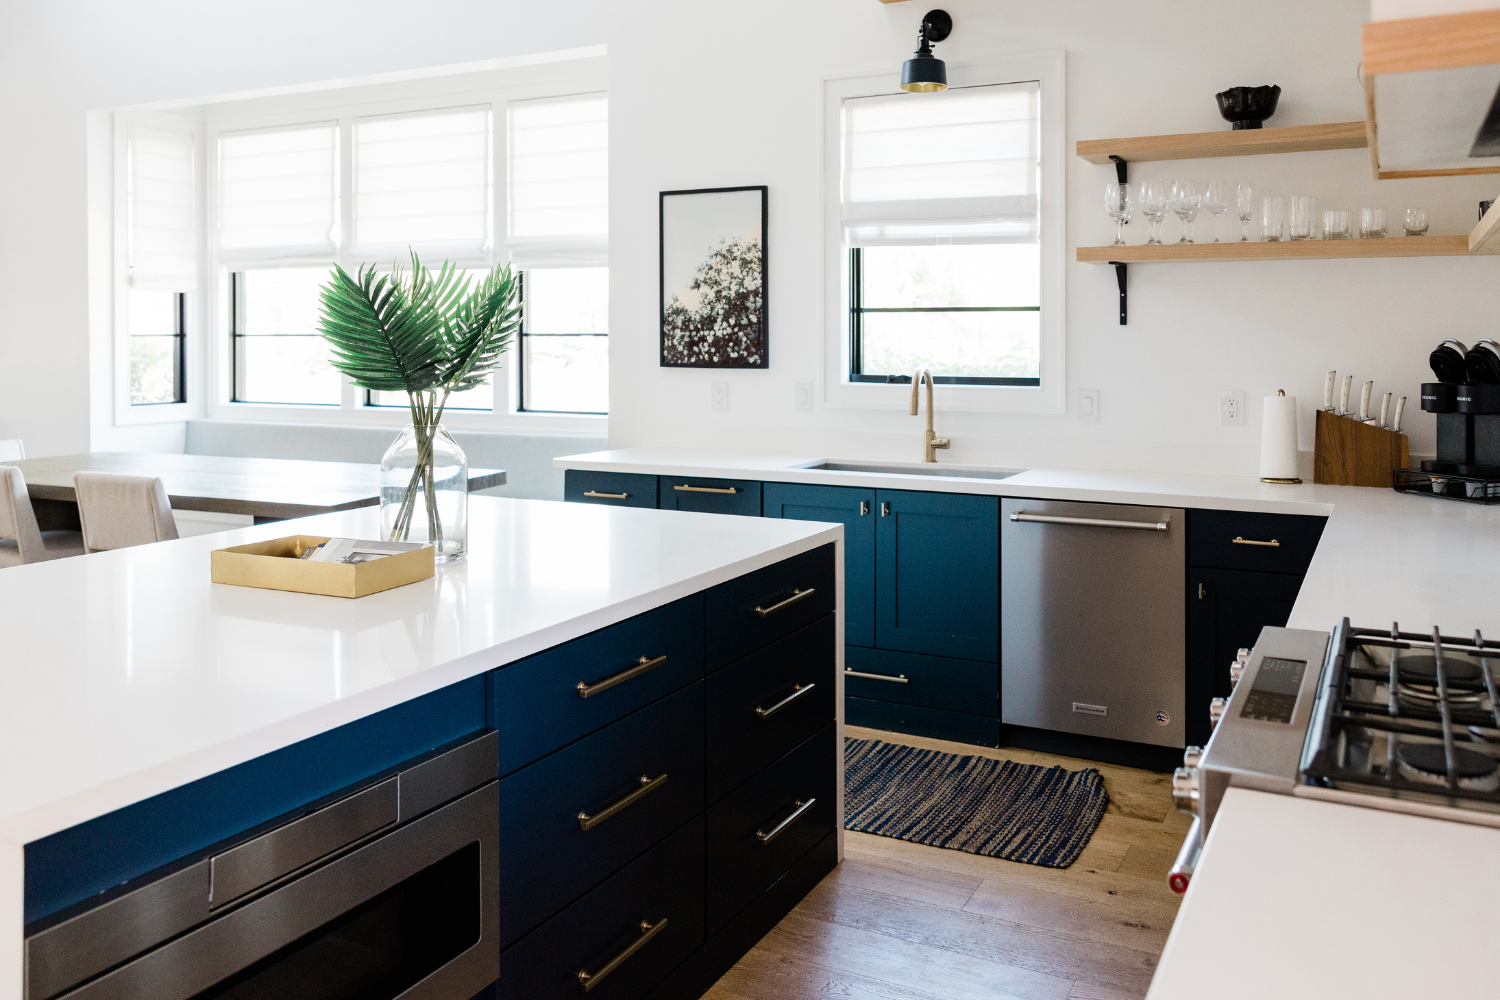 pamela-sandall-design-los-angeles-ca-custom-home-features-modern-kitchen-with-navy-lower-cabinets